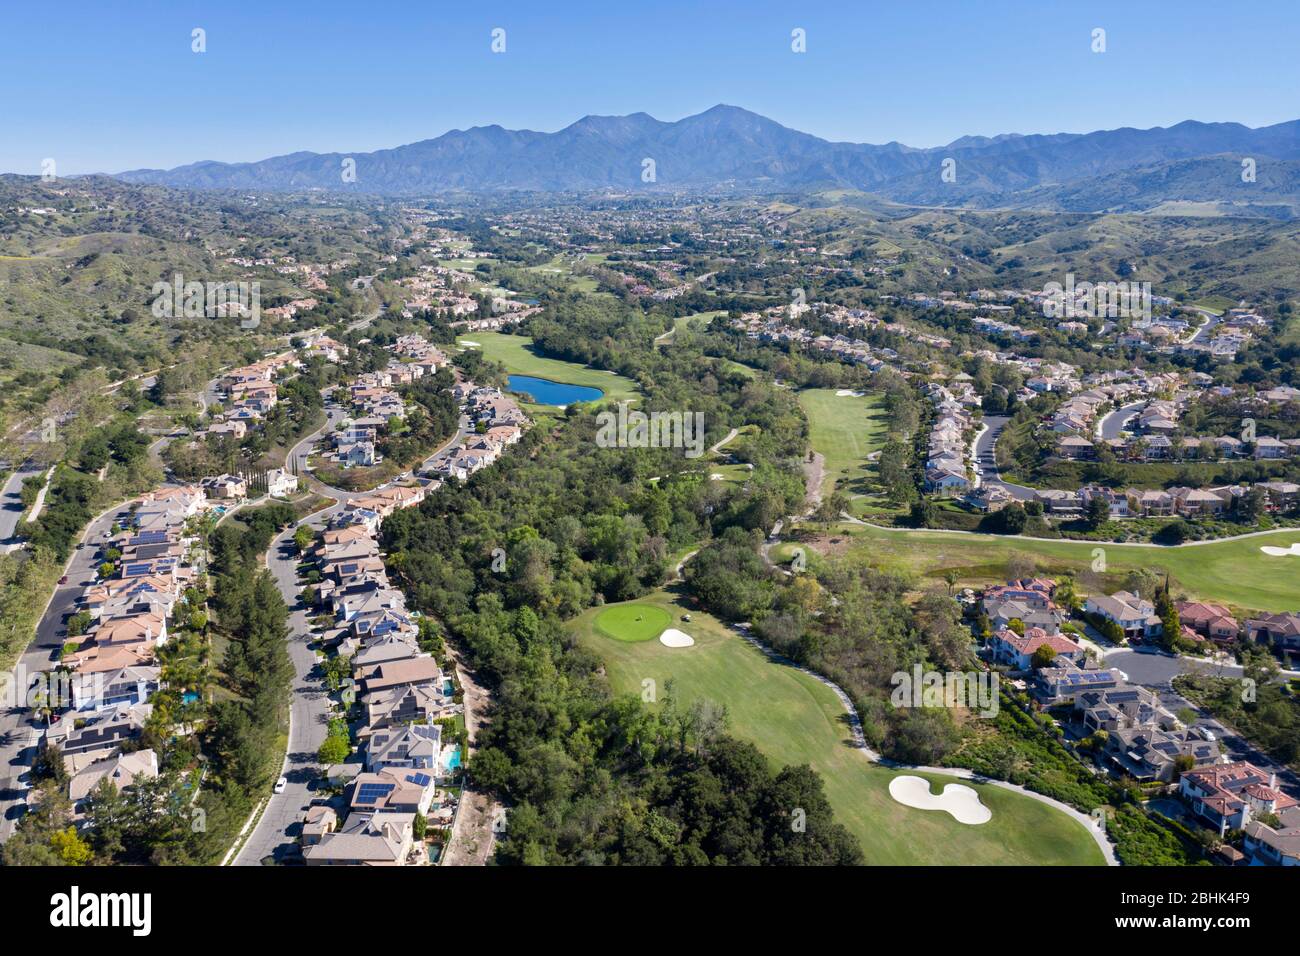 Aerial view above Coto De Caza gated community in the foothills of Orange County, California with Santiago Peak in the distance Stock Photo